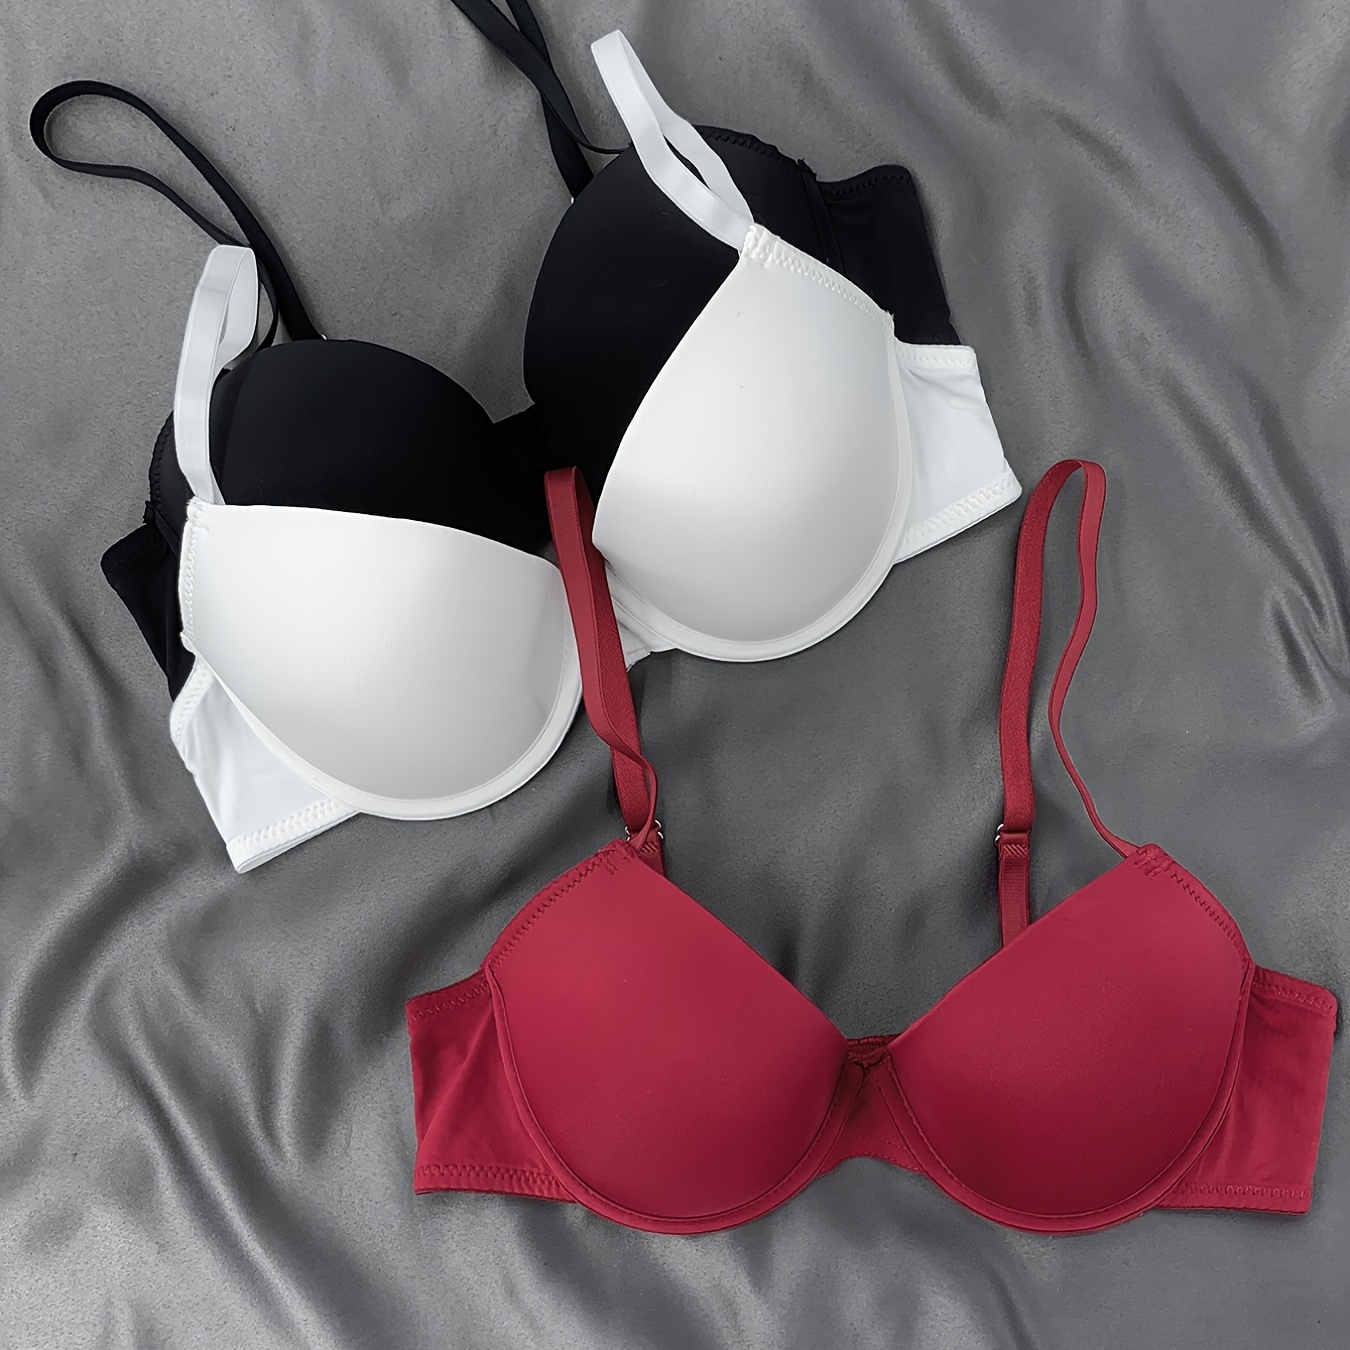 Buy EVERYDAY T SHIRT BRA online at Intimo